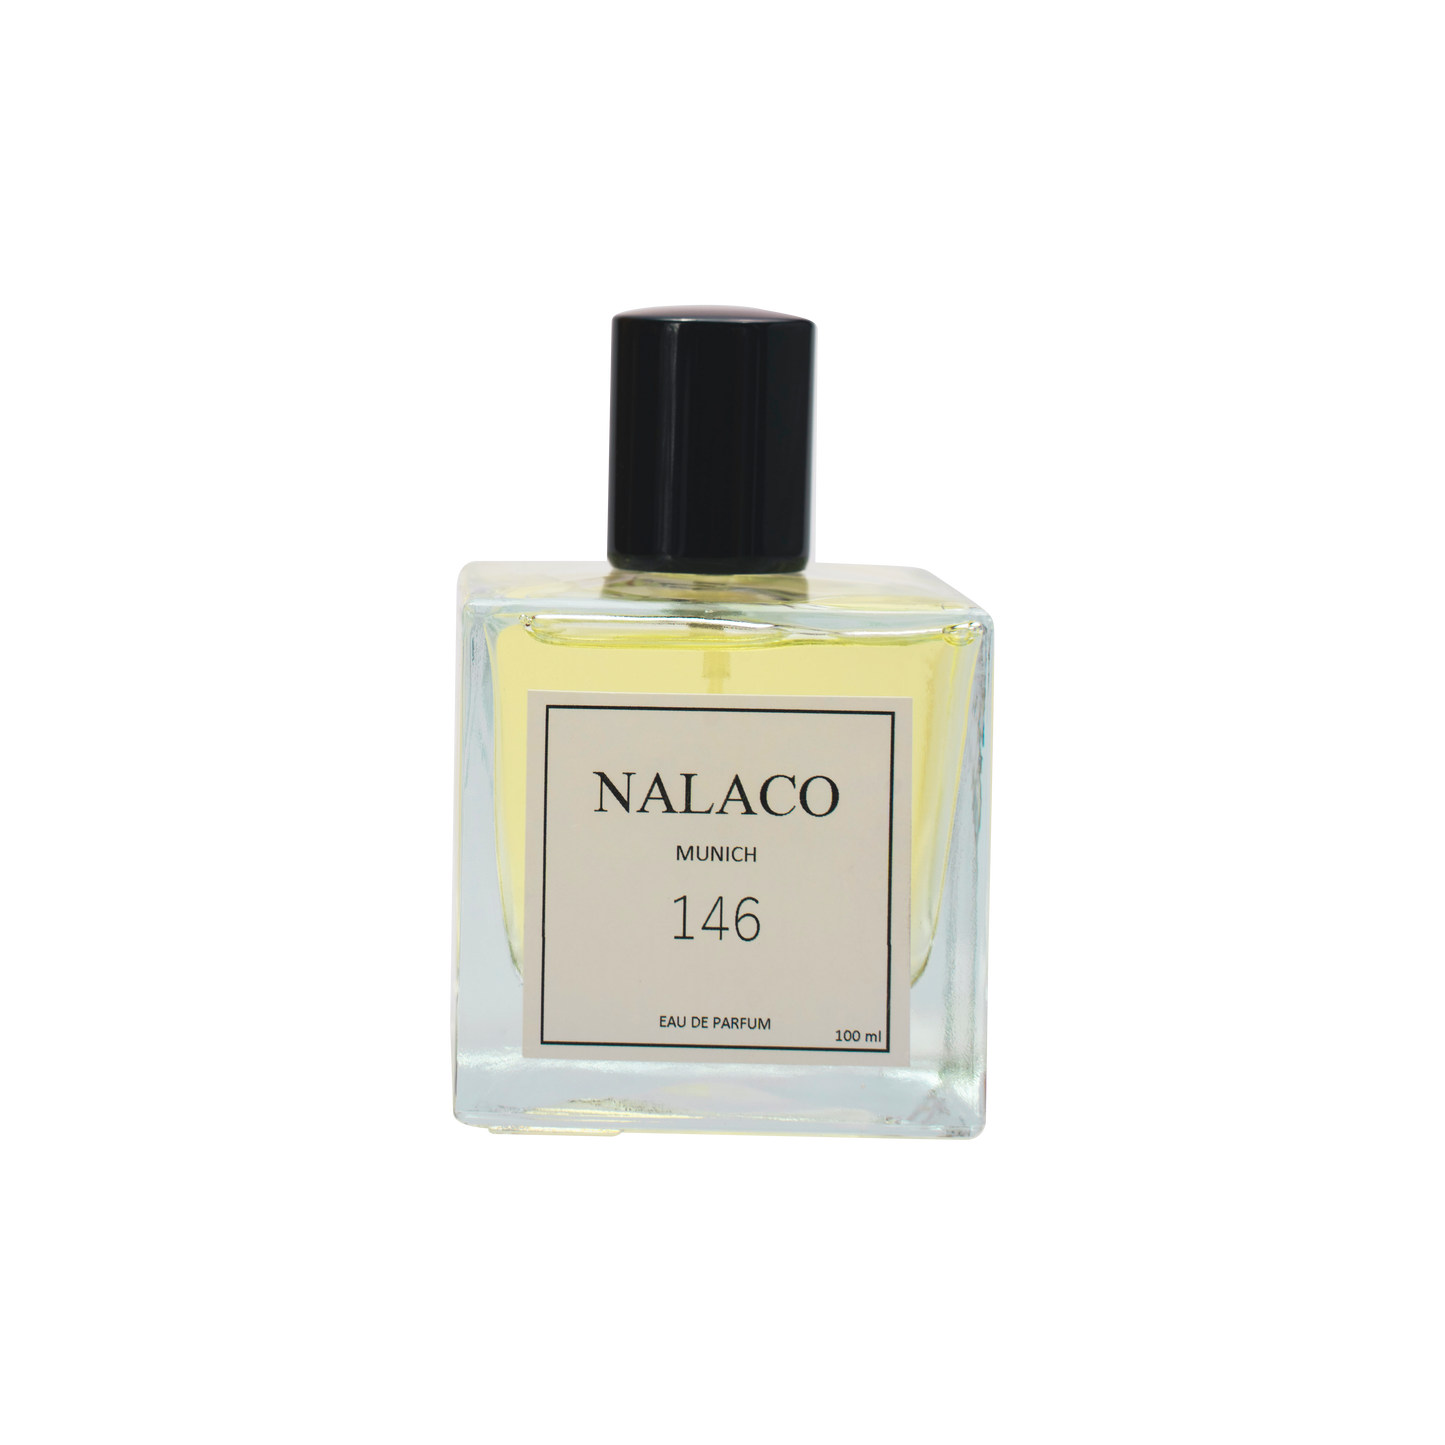 Nalaco No. 146 inspired by Paco Rabanne One Million